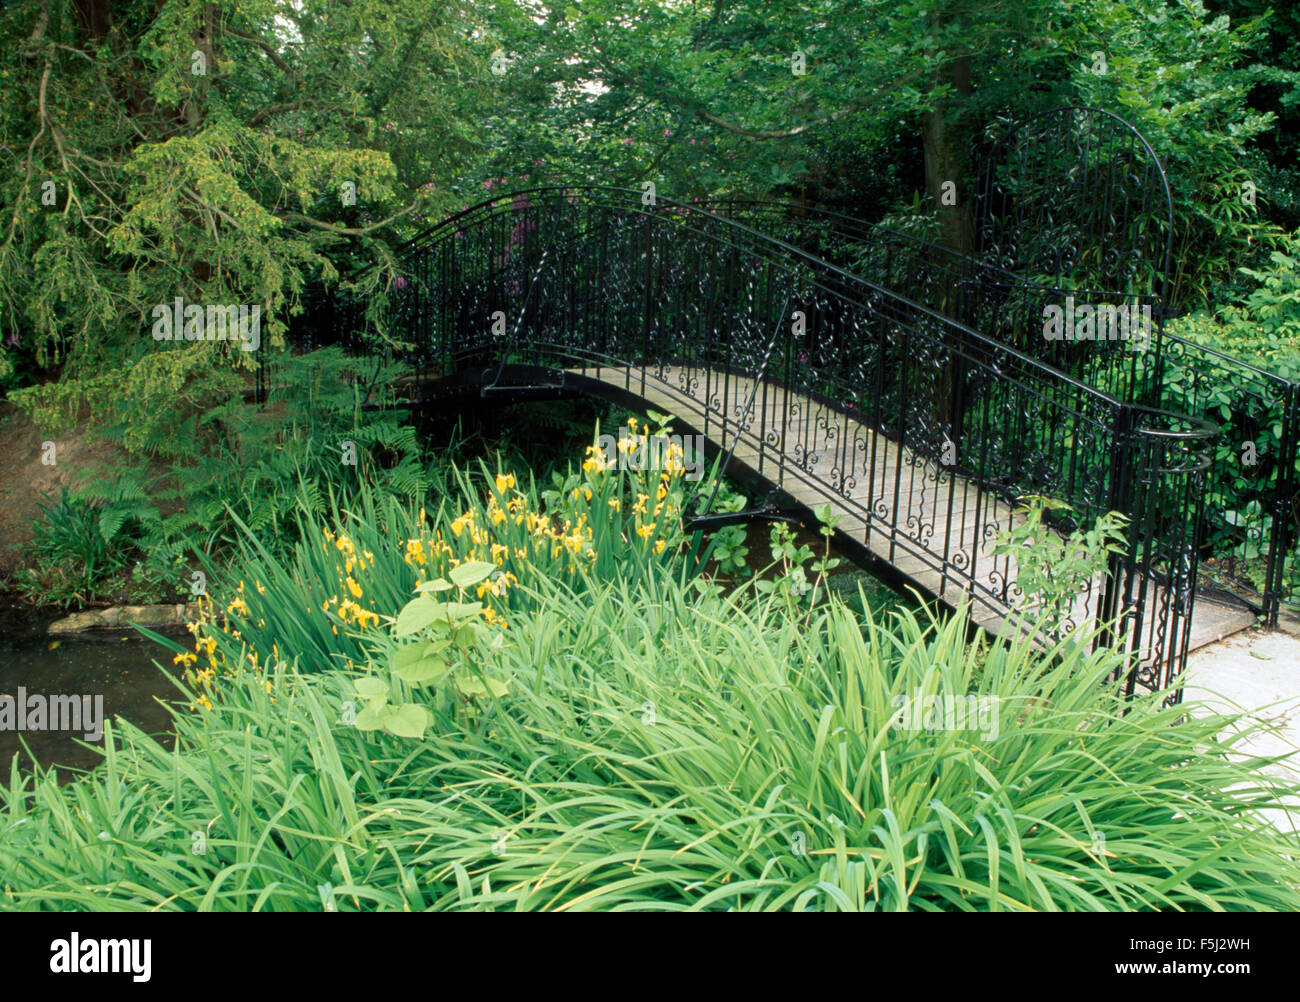 Wrought iron railings on bridge over a stream in  large country garden with yellow irises Stock Photo